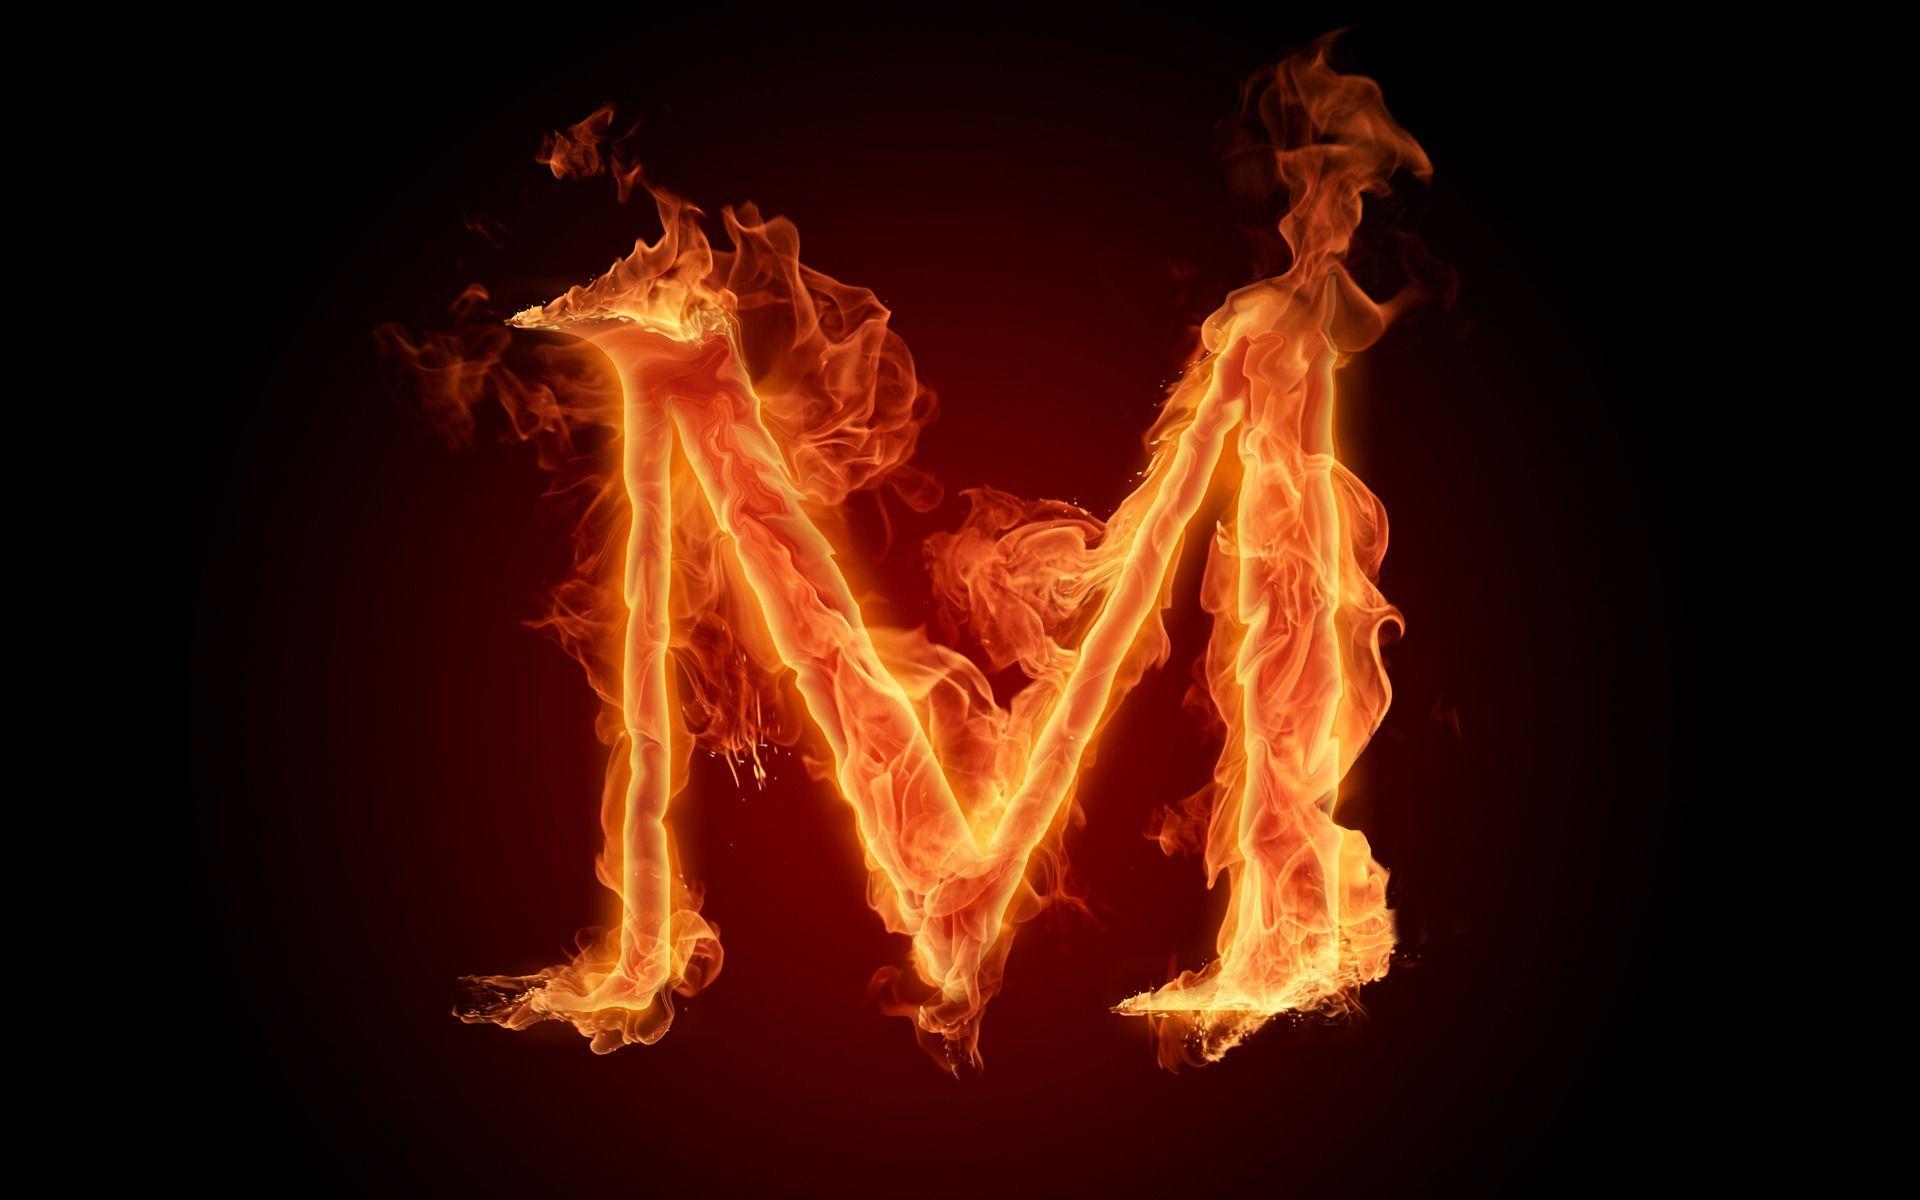 HD Wallpaper The fiery English alphabet picture M. letter